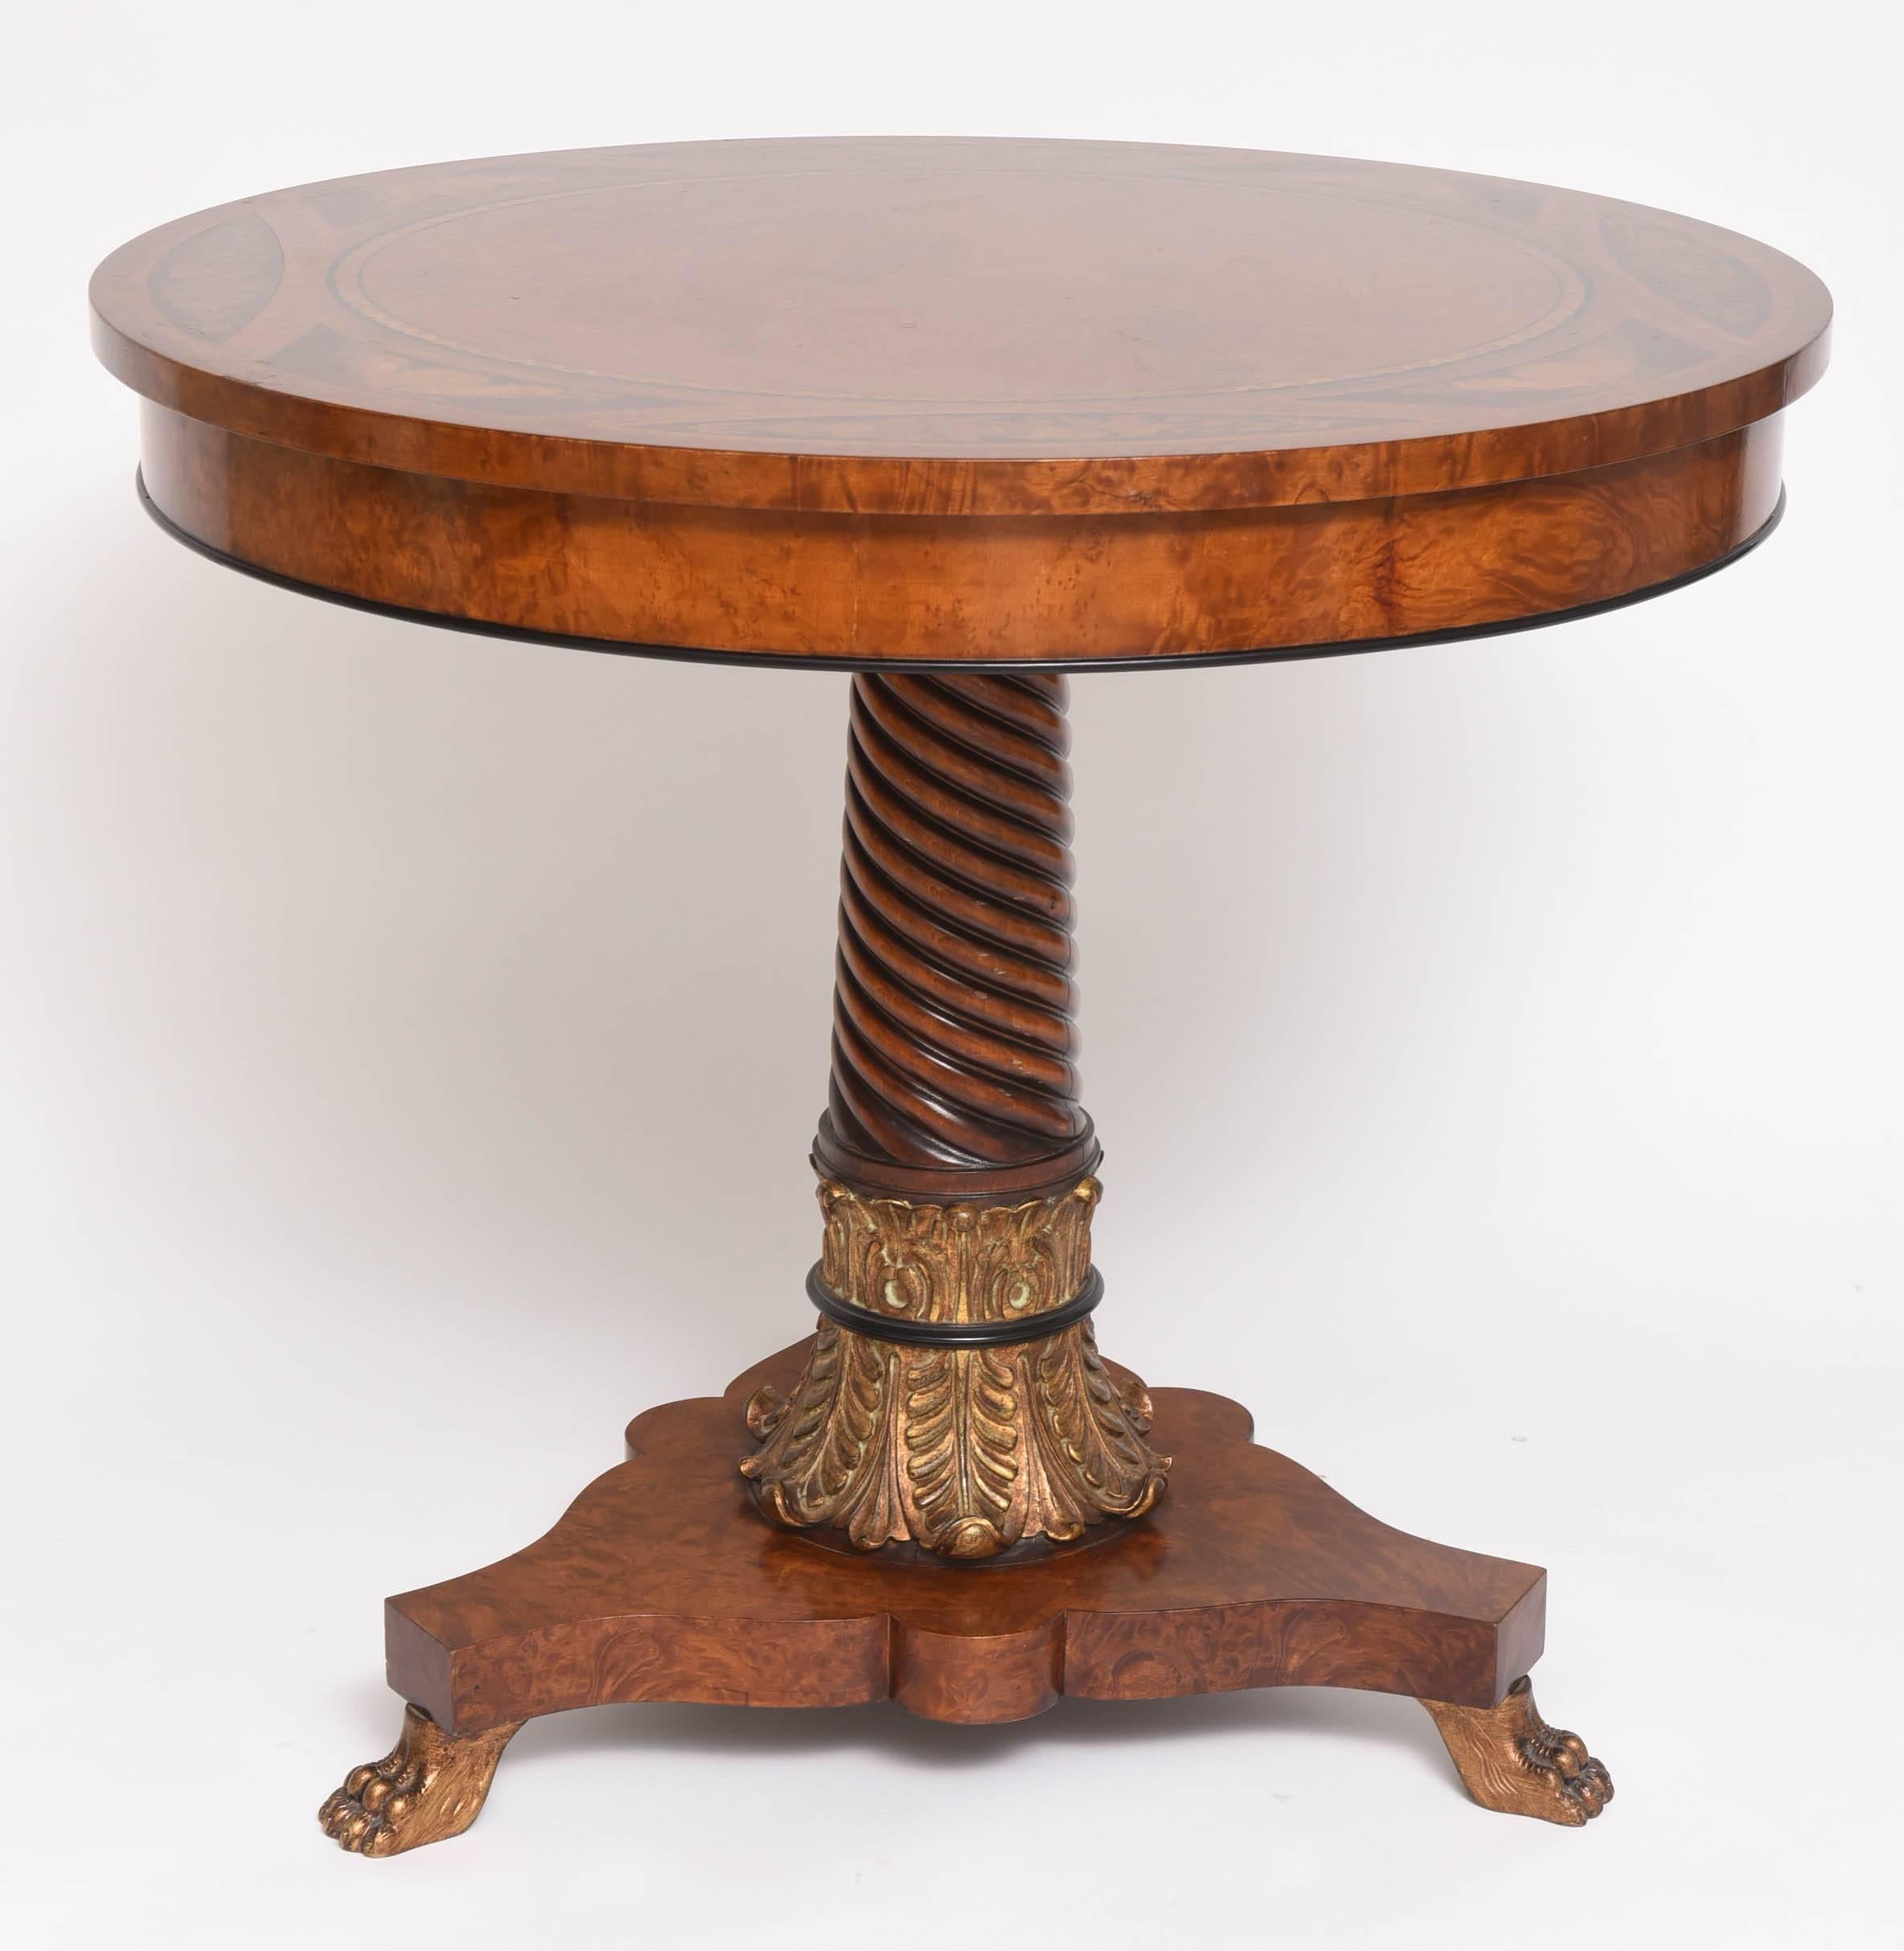 20th Century Neoclassical Style Center Table with Marquetry Top, Rho Mobili D' Epoca, Italy